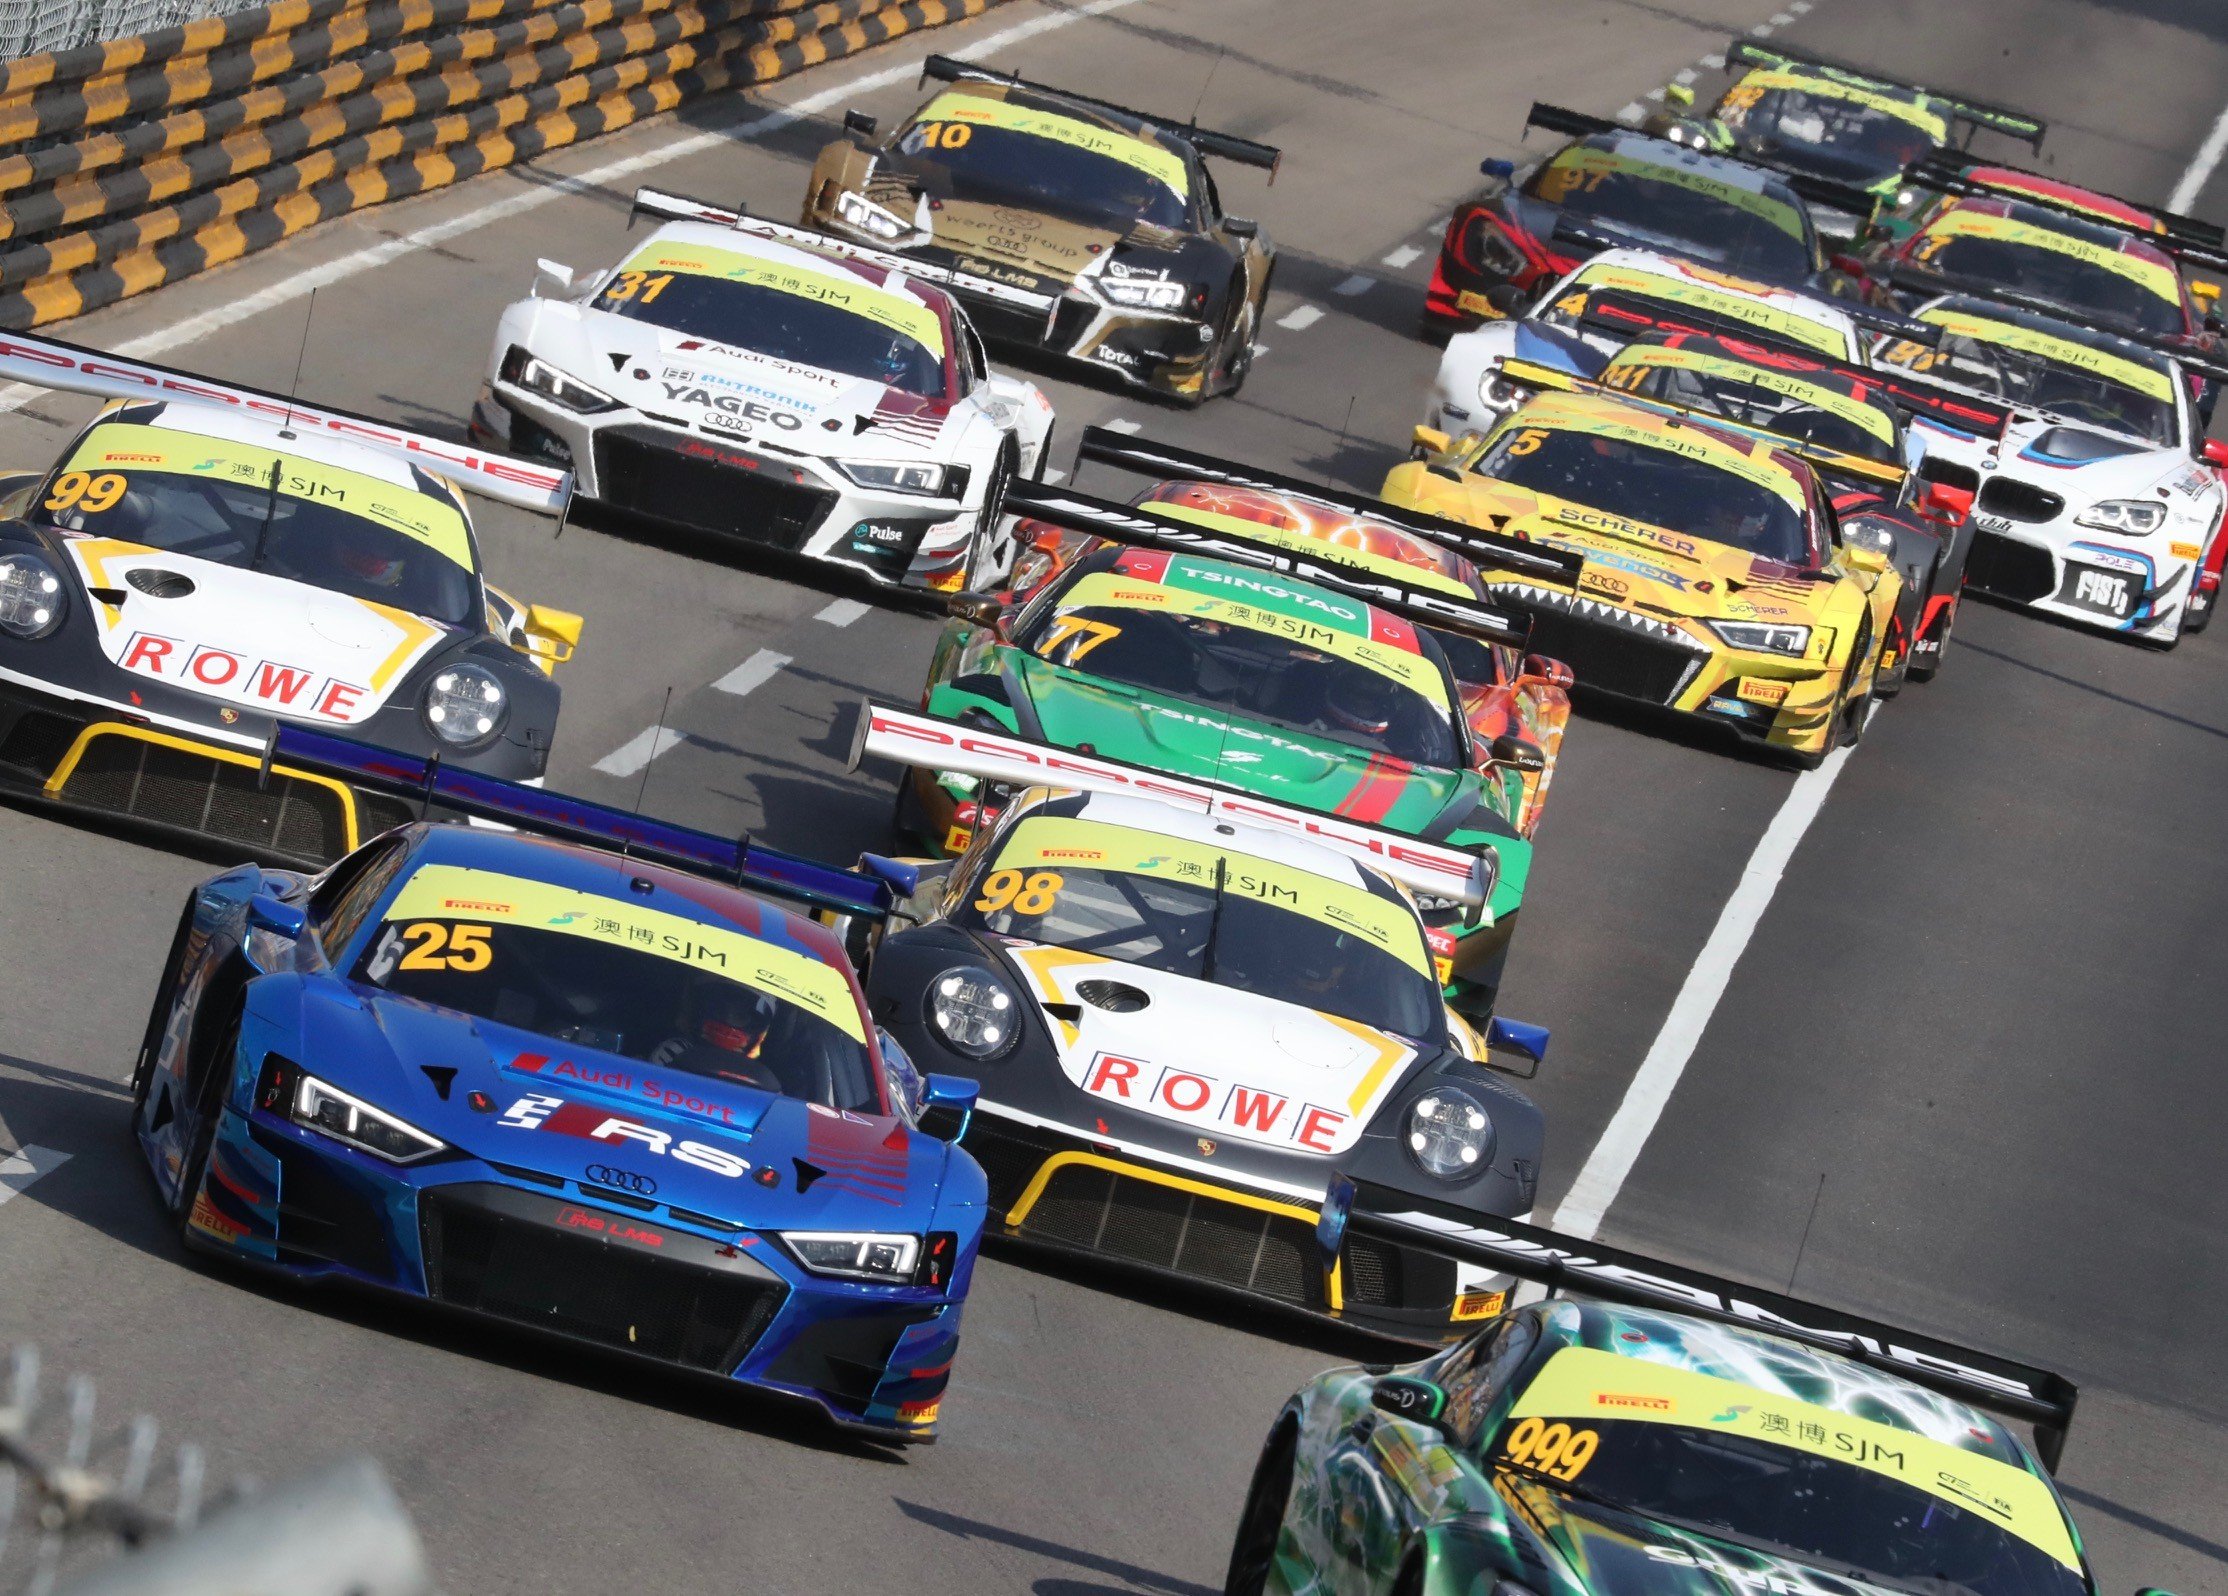 Drivers in action at the 66th Macau Grand Prix. Photo: K. Y. Cheng